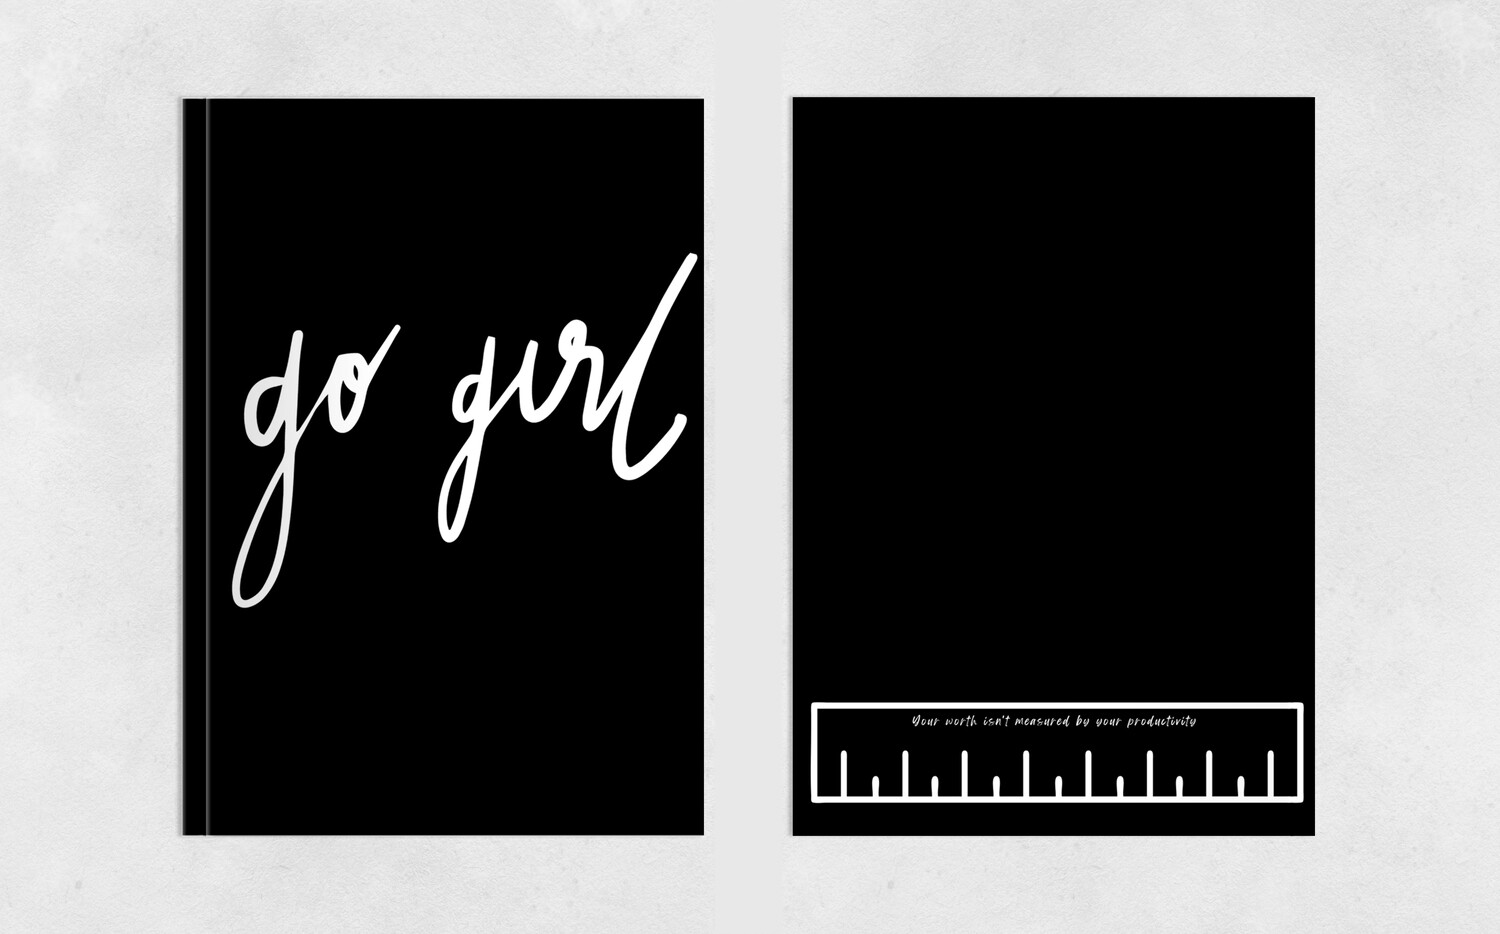 Go Girl NoteBook Journal with Affirmations